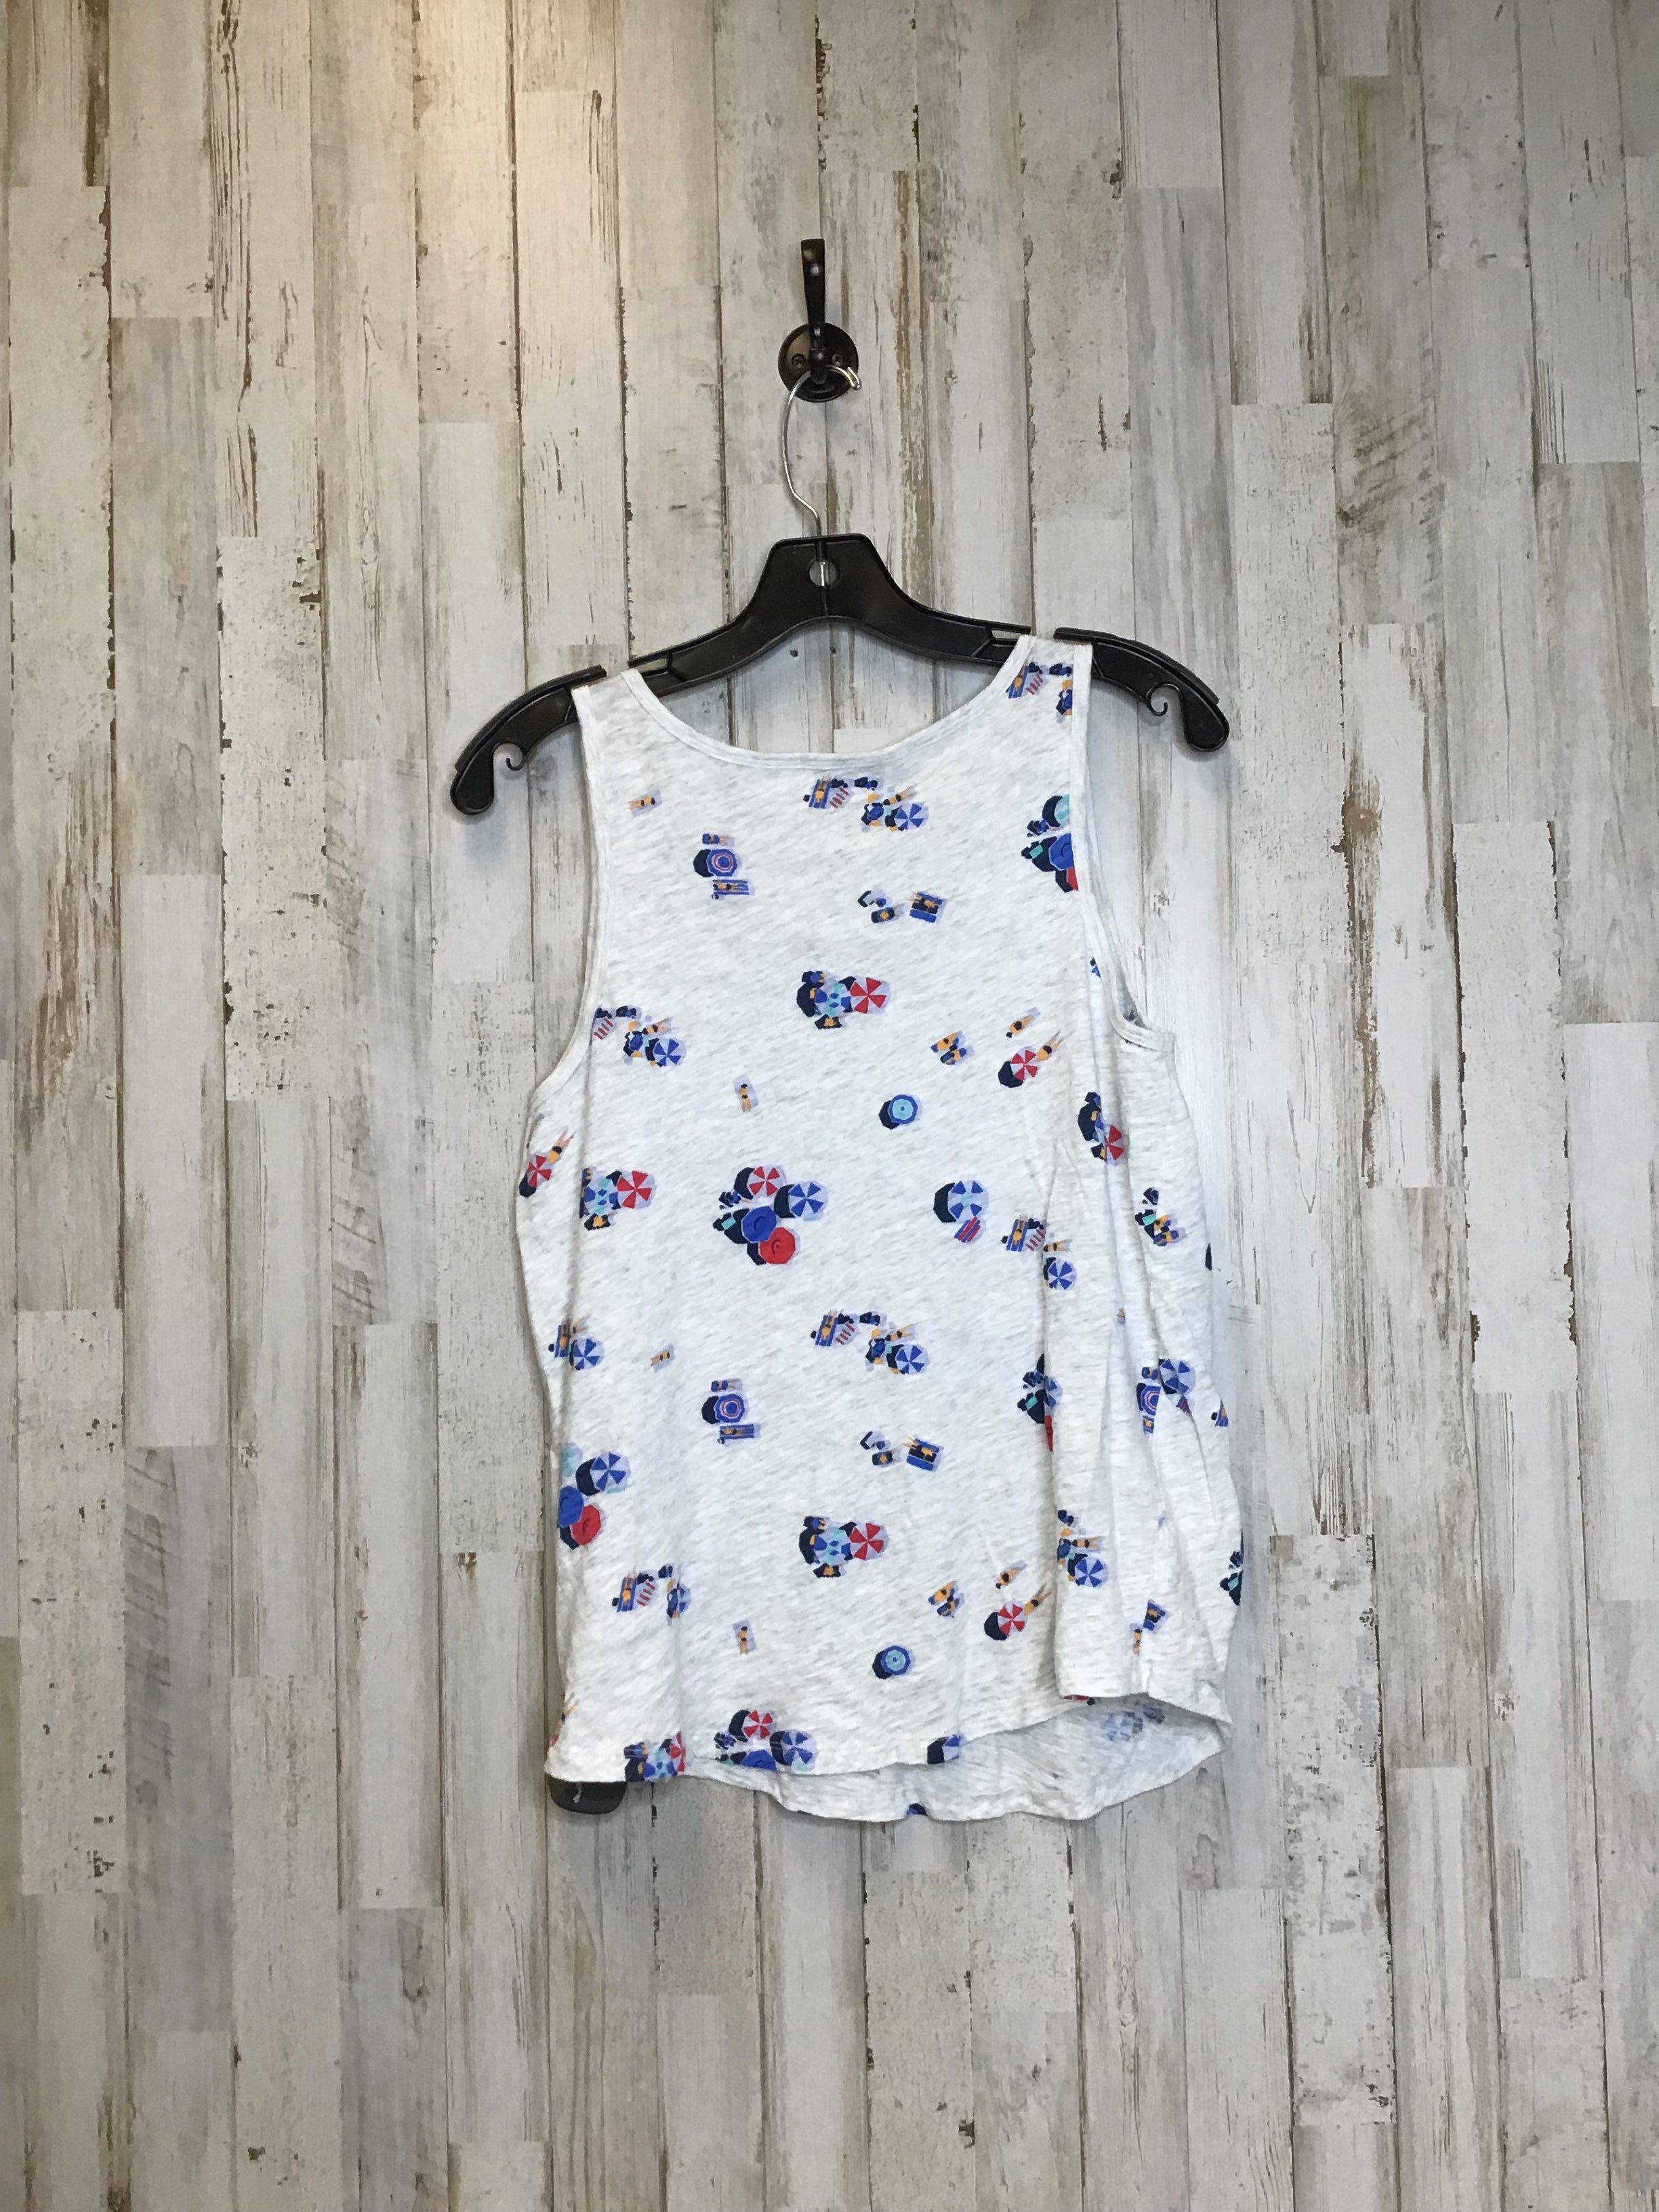  Photo #1 - BRAND: GAP <BR>STYLE: TOP SLEEVELESS <BR>COLOR: MULTI <BR>SIZE: M <BR>SKU: 309-309145-8368<BR><BR>*ALL ITEMS ARE USED AND WILL HAVE NORMAL WEAR. EVEN NWT ITEMS HAVE BEEN IN SOMEONE’S HOME. WE DO THOROUGHLY CHECK ITEMS FOR MARKS, WEAR, AND EVEN SMELLS. WE ALSO DO OUR BEST TO CLEARLY PHOTOGRAPH ALL ITEMS INCLUDING ANY IMPERFECTIONS IN THE PHOTOS. ITEMS ARE ALSO DOUBLE CHECKED BEFORE SHIPPING. FOR THESE REASONS, ITEMS BOUGHT ONLINE DO NOT QUALIFY FOR A REFUND.